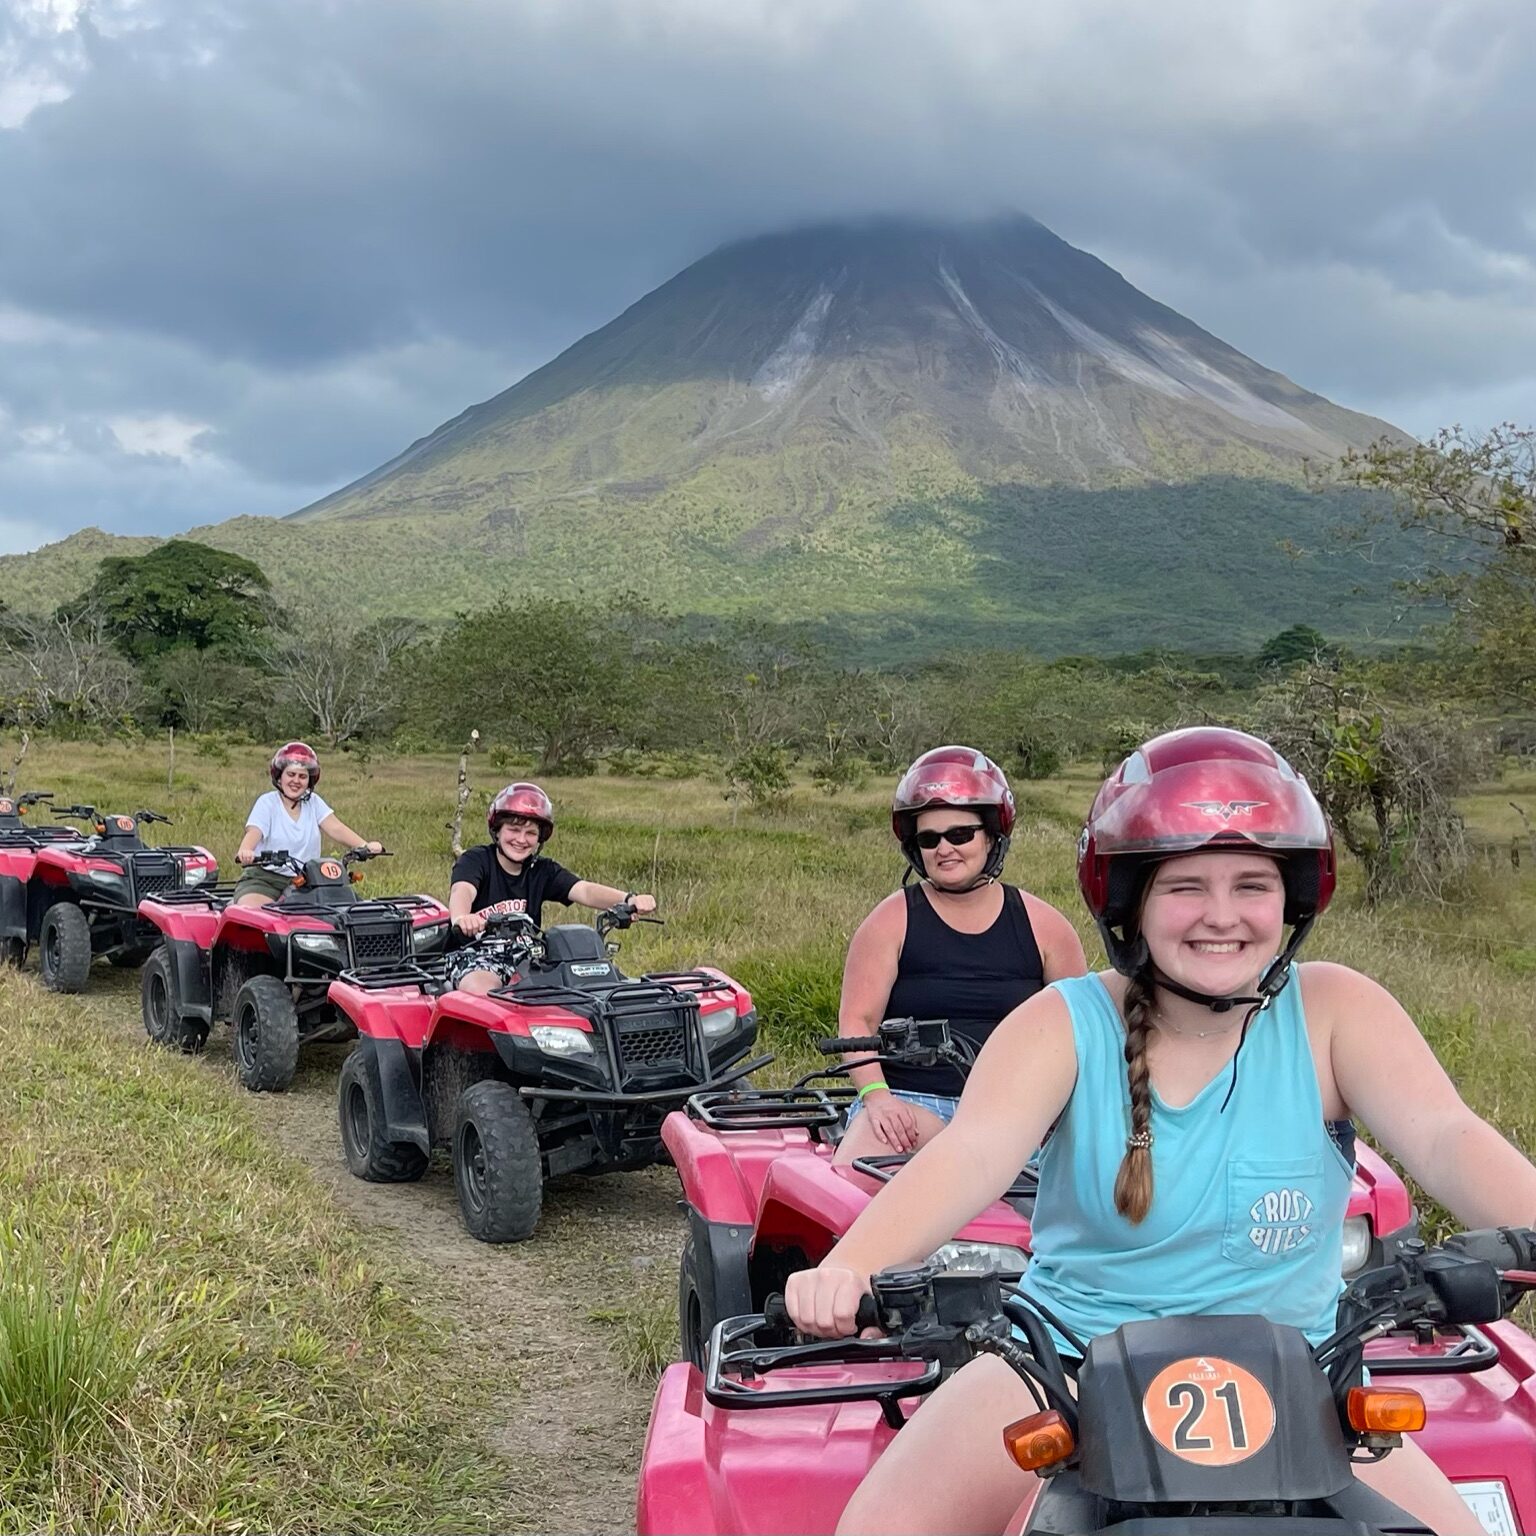 Riding ATV's in Arenal rainforest.